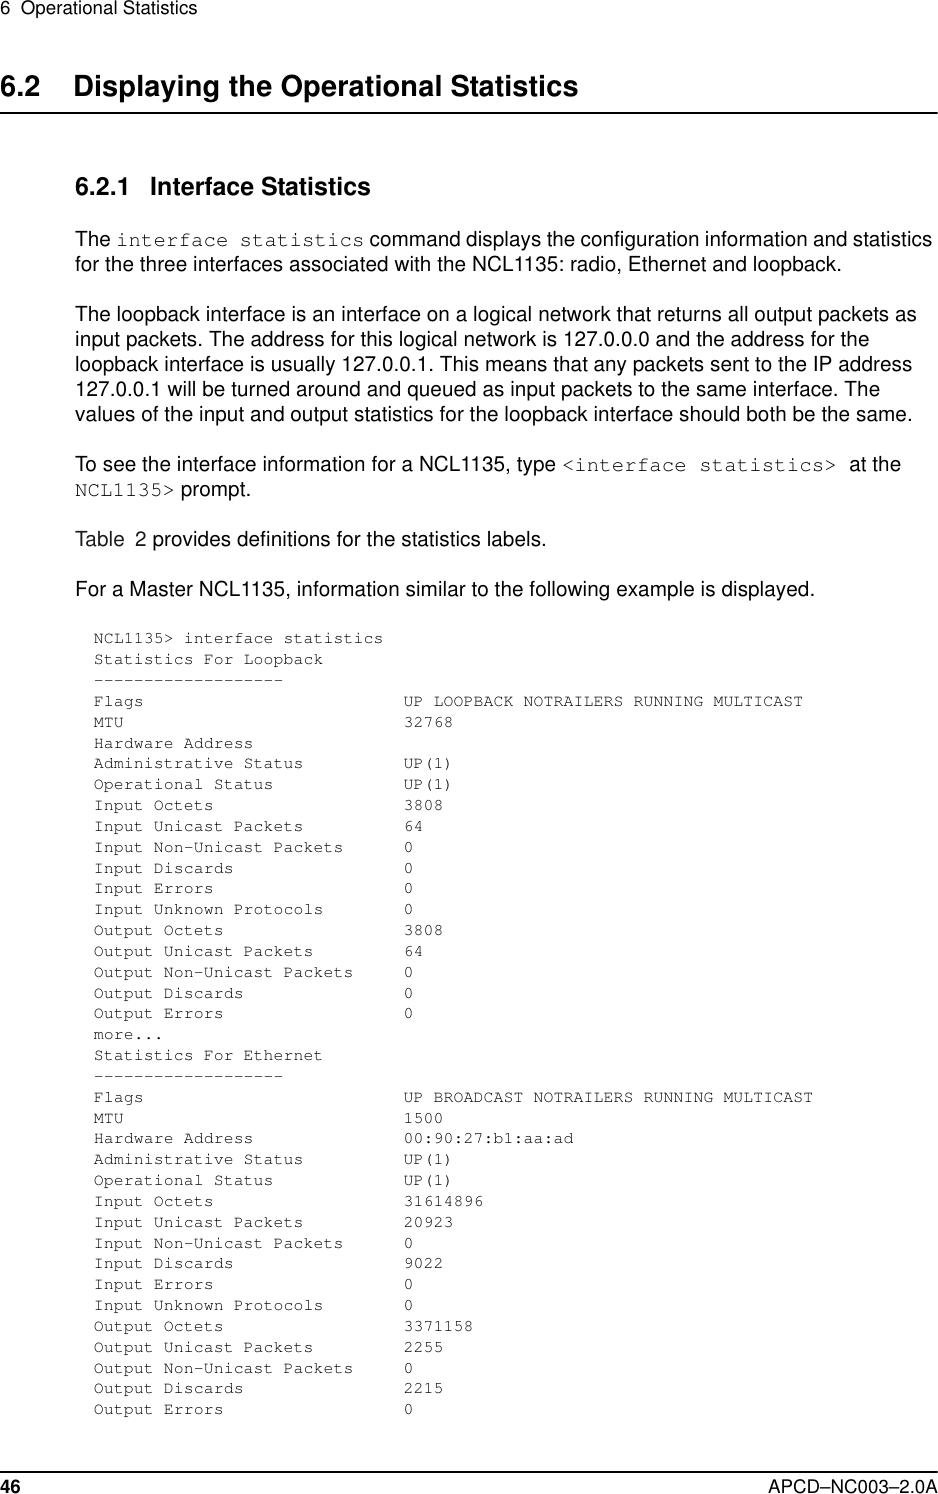 6  Operational Statistics46 APCD–NC003–2.0A6.2    Displaying the Operational Statistics6.2.1 Interface StatisticsThe interface statistics command displays the configuration information and statistics for the three interfaces associated with the NCL1135: radio, Ethernet and loopback.The loopback interface is an interface on a logical network that returns all output packets as input packets. The address for this logical network is 127.0.0.0 and the address for the loopback interface is usually 127.0.0.1. This means that any packets sent to the IP address 127.0.0.1 will be turned around and queued as input packets to the same interface. The values of the input and output statistics for the loopback interface should both be the same.To see the interface information for a NCL1135, type &lt;interface statistics&gt; at the NCL1135&gt; prompt.Table 2 provides definitions for the statistics labels.For a Master NCL1135, information similar to the following example is displayed.NCL1135&gt; interface statisticsStatistics For Loopback-------------------Flags                          UP LOOPBACK NOTRAILERS RUNNING MULTICASTMTU                            32768Hardware AddressAdministrative Status          UP(1)Operational Status             UP(1)Input Octets                   3808Input Unicast Packets          64Input Non-Unicast Packets      0Input Discards                 0Input Errors                   0Input Unknown Protocols        0Output Octets                  3808Output Unicast Packets         64Output Non-Unicast Packets     0Output Discards                0Output Errors                  0more...Statistics For Ethernet-------------------Flags                          UP BROADCAST NOTRAILERS RUNNING MULTICASTMTU                            1500Hardware Address               00:90:27:b1:aa:adAdministrative Status          UP(1)Operational Status             UP(1)Input Octets                   31614896Input Unicast Packets          20923Input Non-Unicast Packets      0Input Discards                 9022Input Errors                   0Input Unknown Protocols        0Output Octets                  3371158Output Unicast Packets         2255Output Non-Unicast Packets     0Output Discards                2215Output Errors                  0